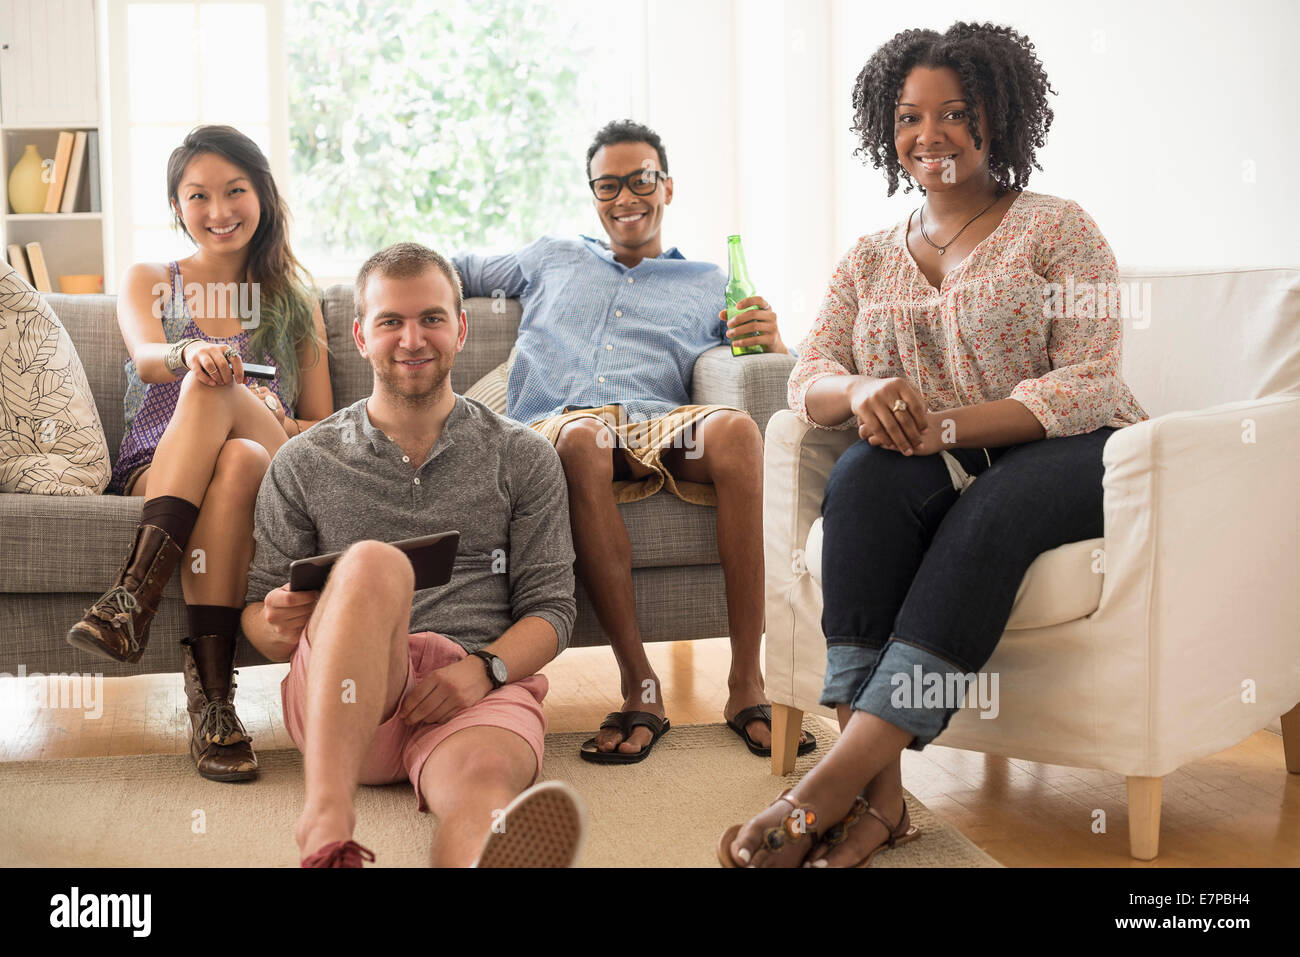 Portrait of group of friends sitting in living room Stock Photo